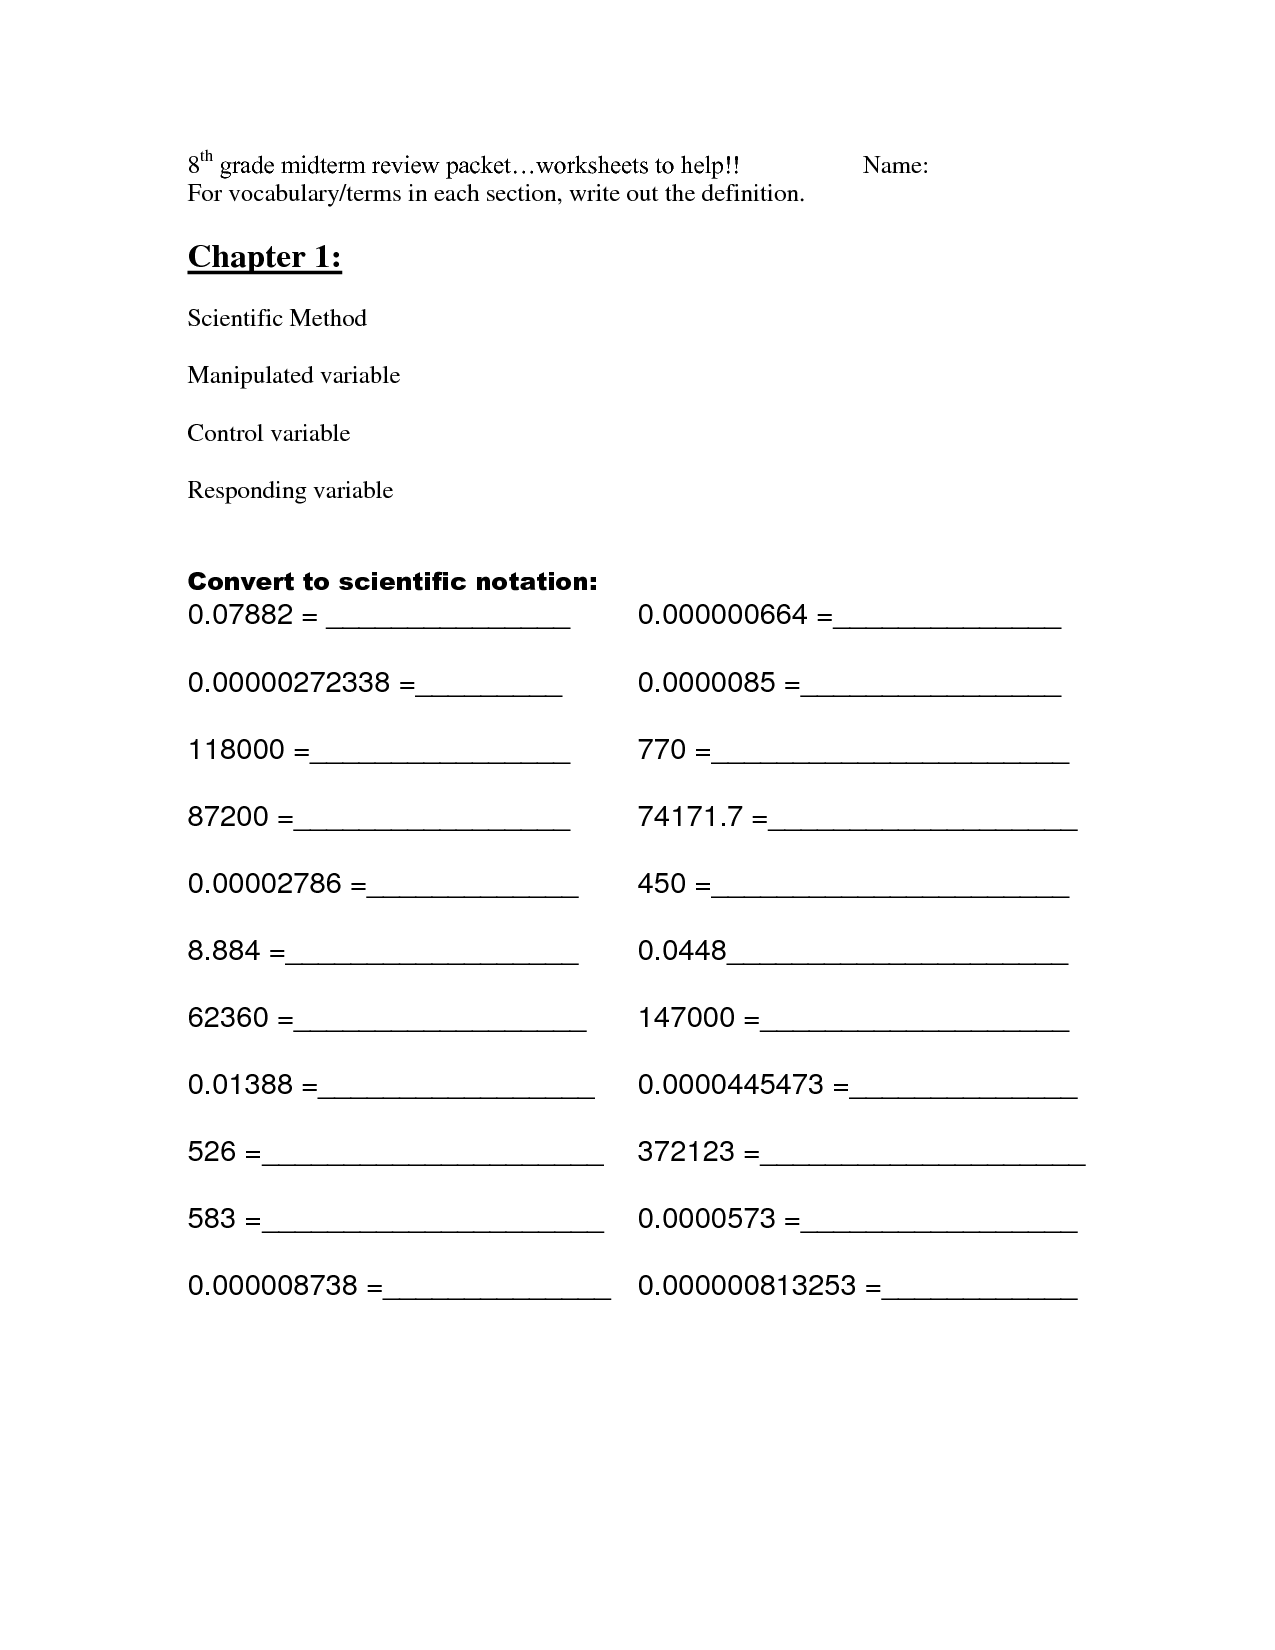 English For Grade 8 Worksheets